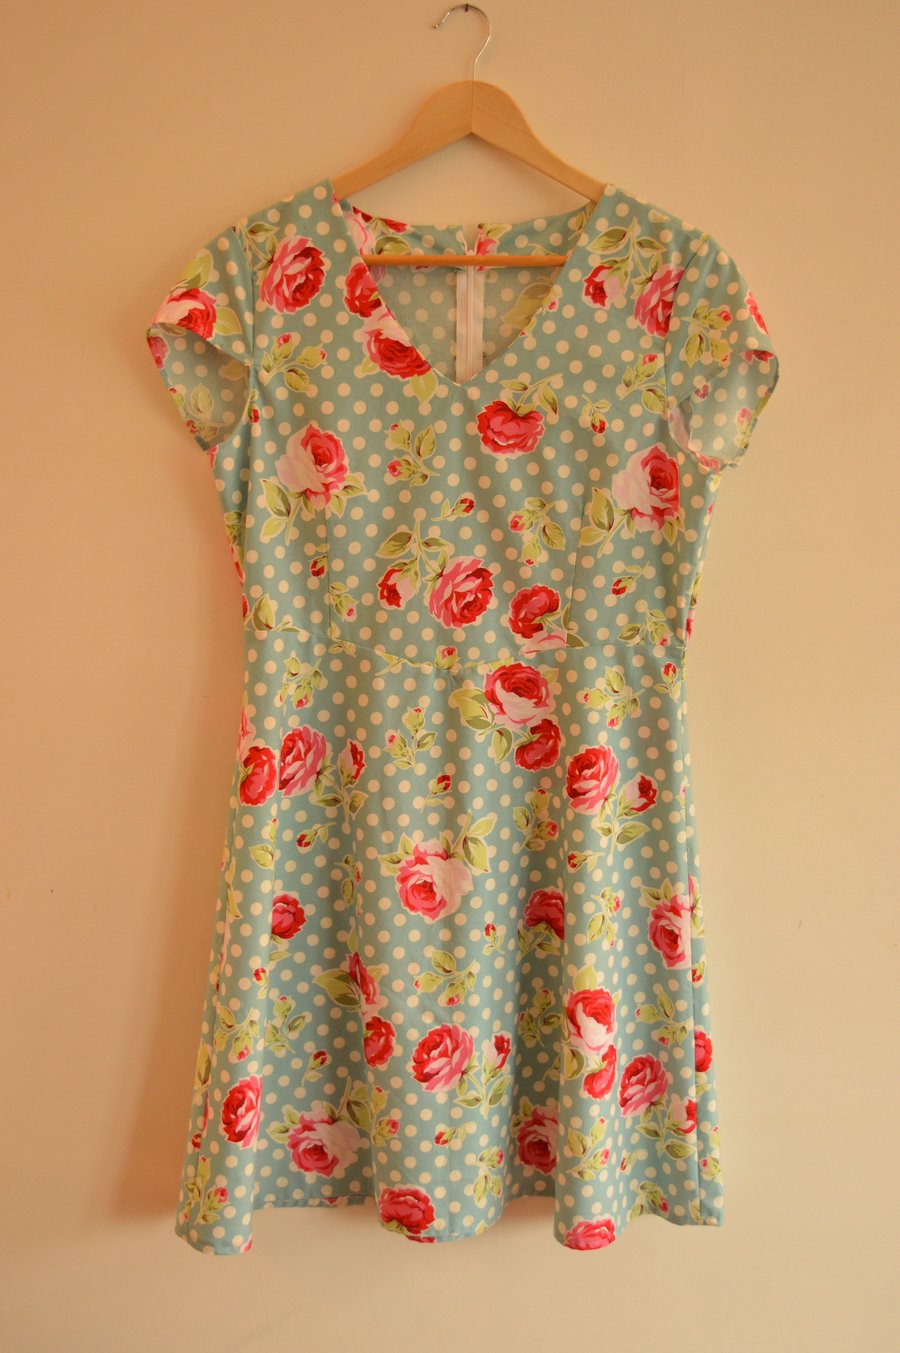 SALE  Floral tea dress in blue and white spots with floral print size 14